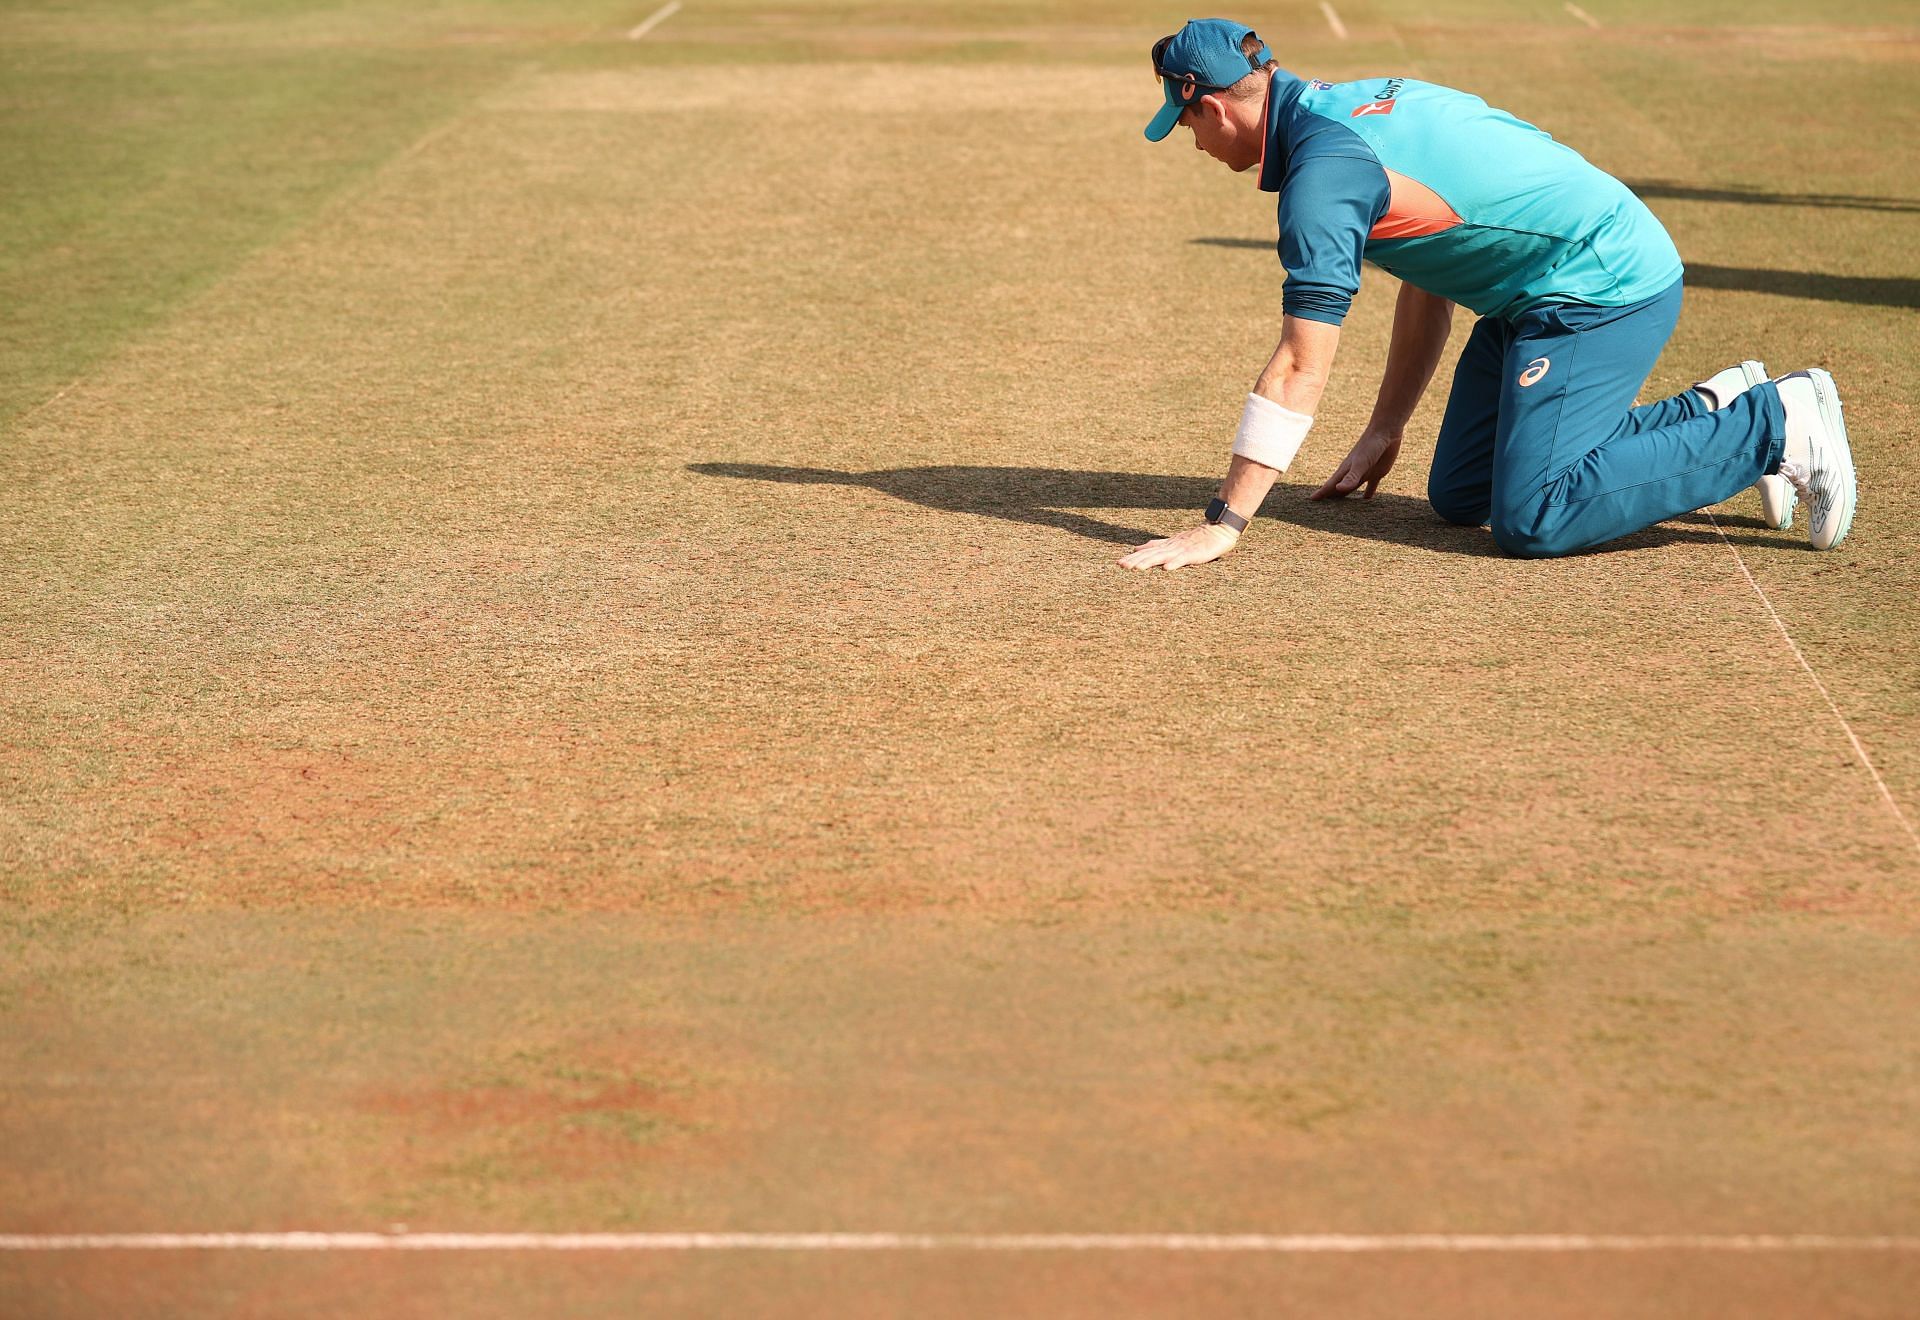 Steve Smith inspecting the pitch. (Credits: Getty)